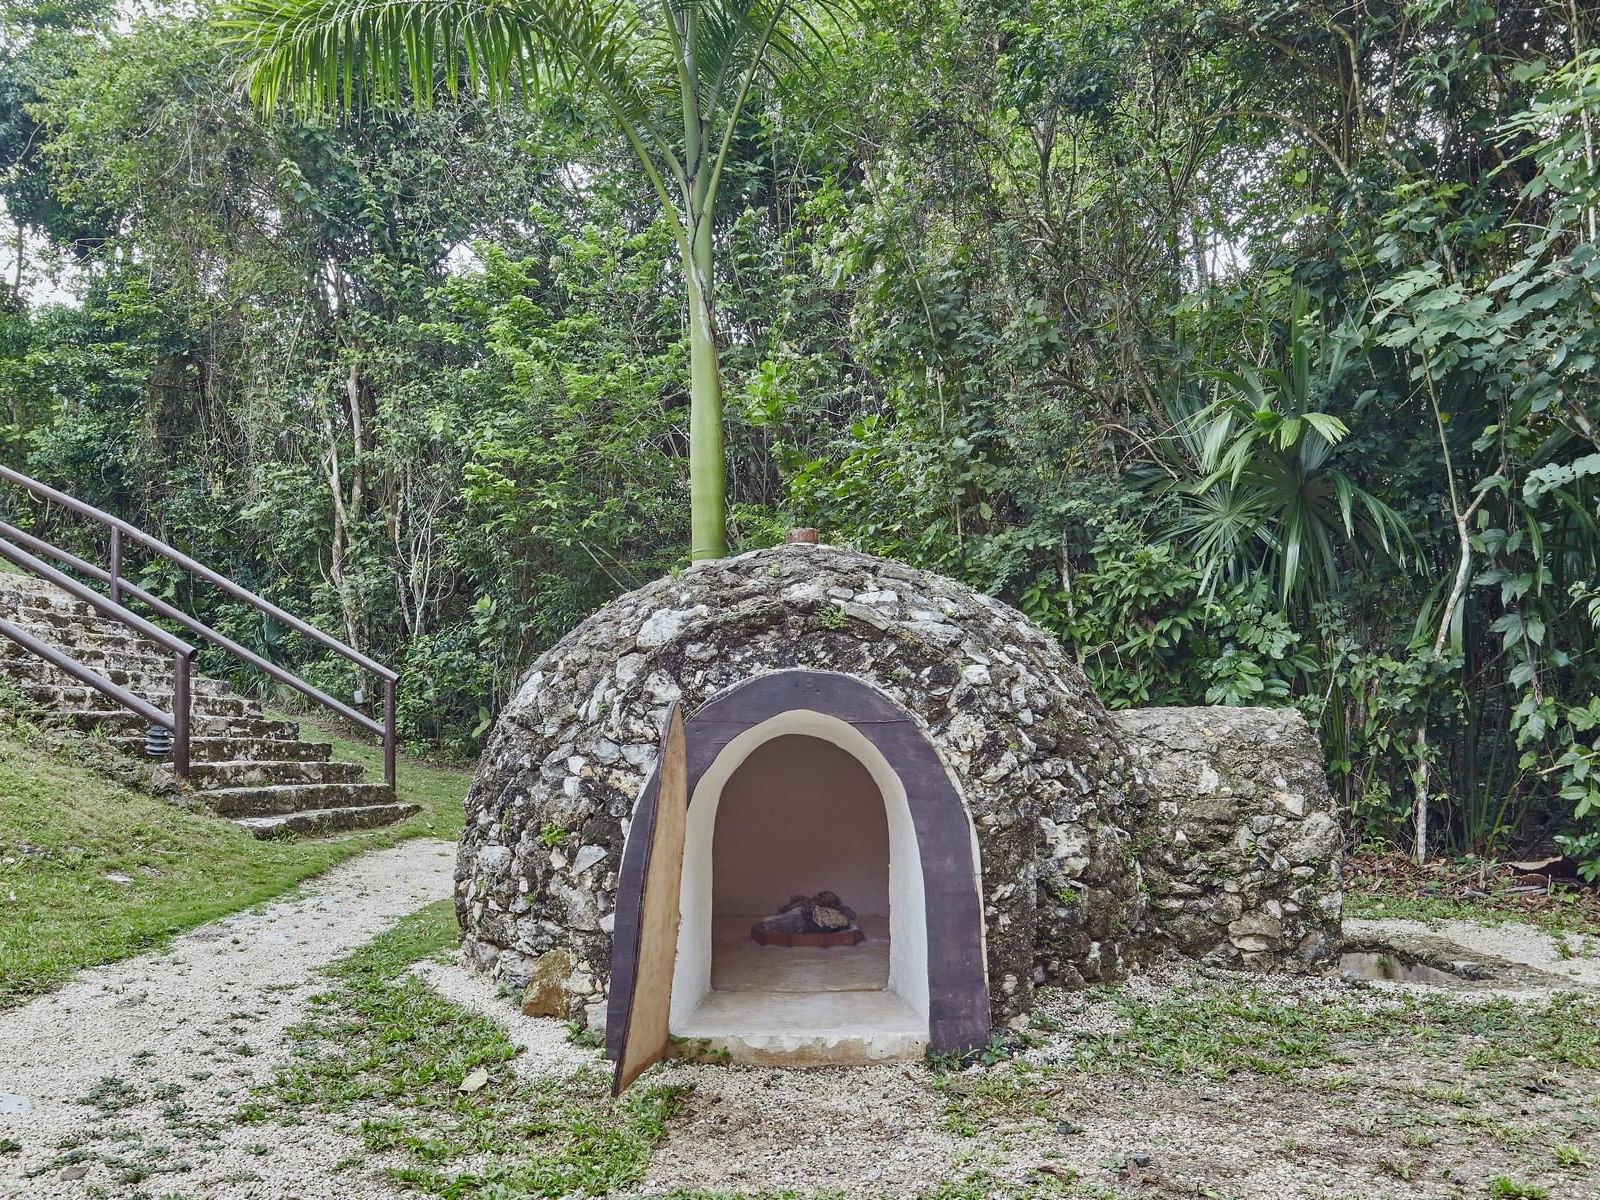 A place for meditation at the wellness center at La Colección